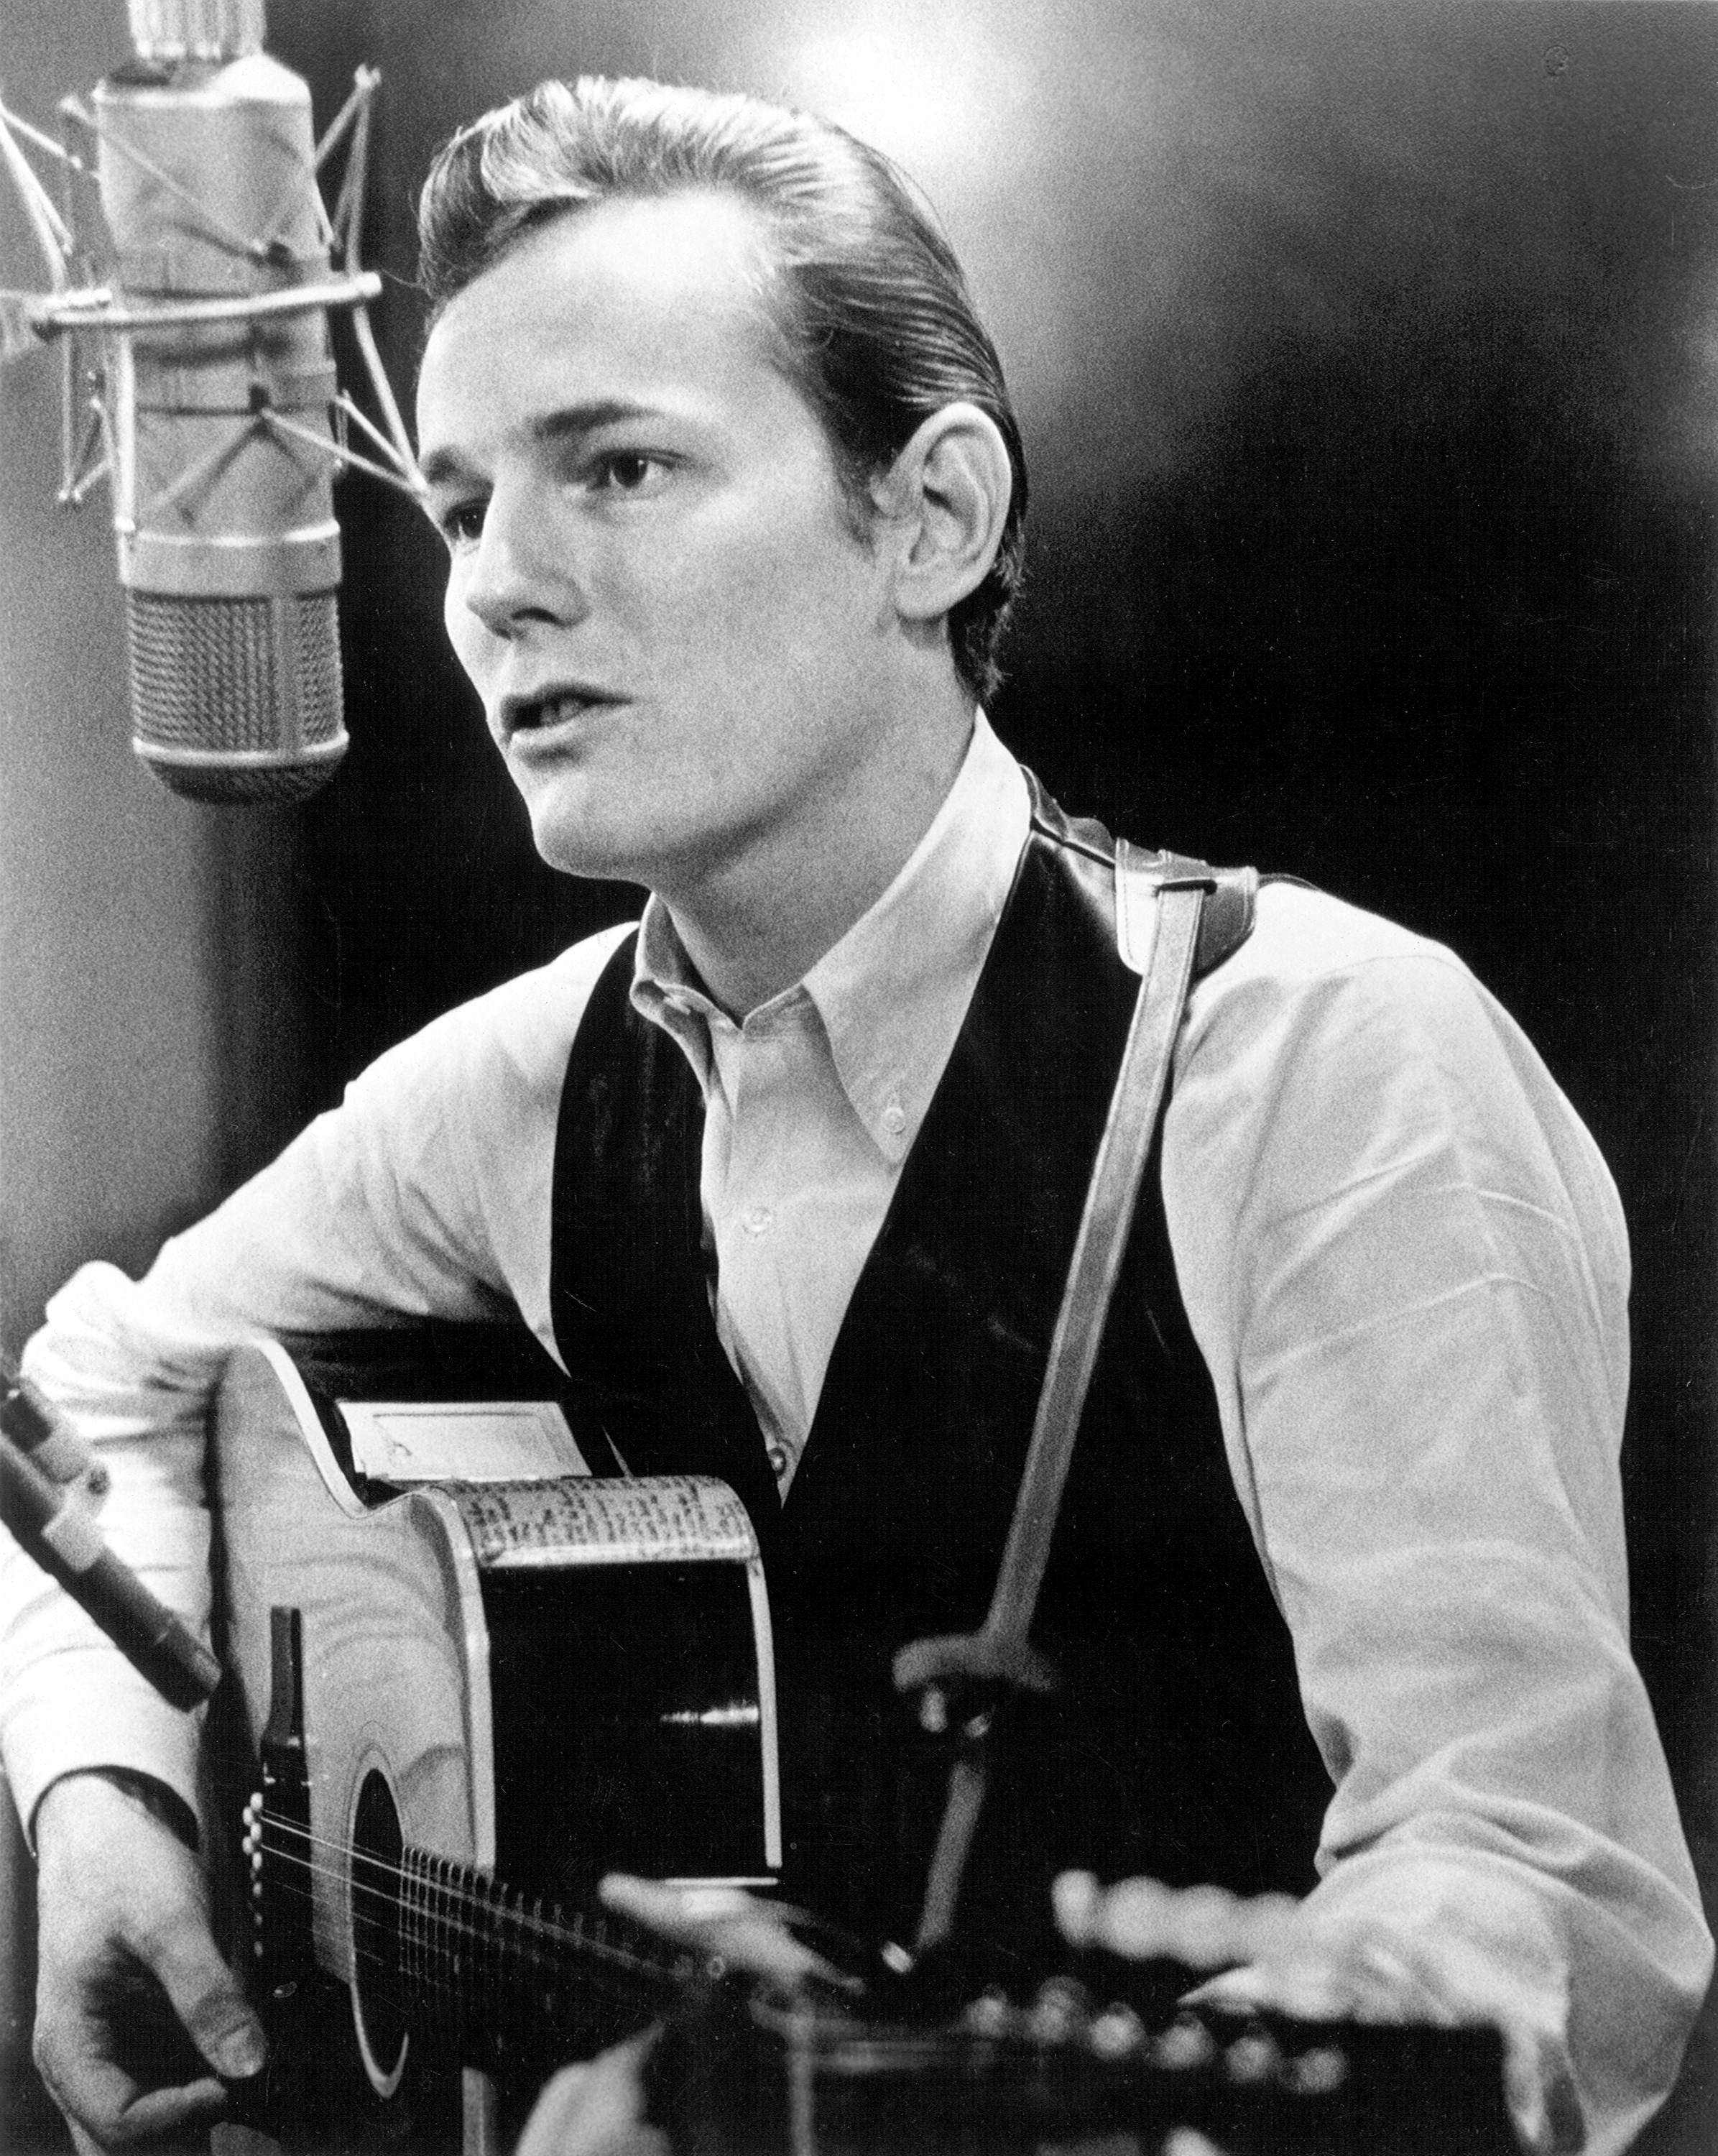 Gordon Lightfoot in a recording studio, circa 1965. | Source: Getty Images